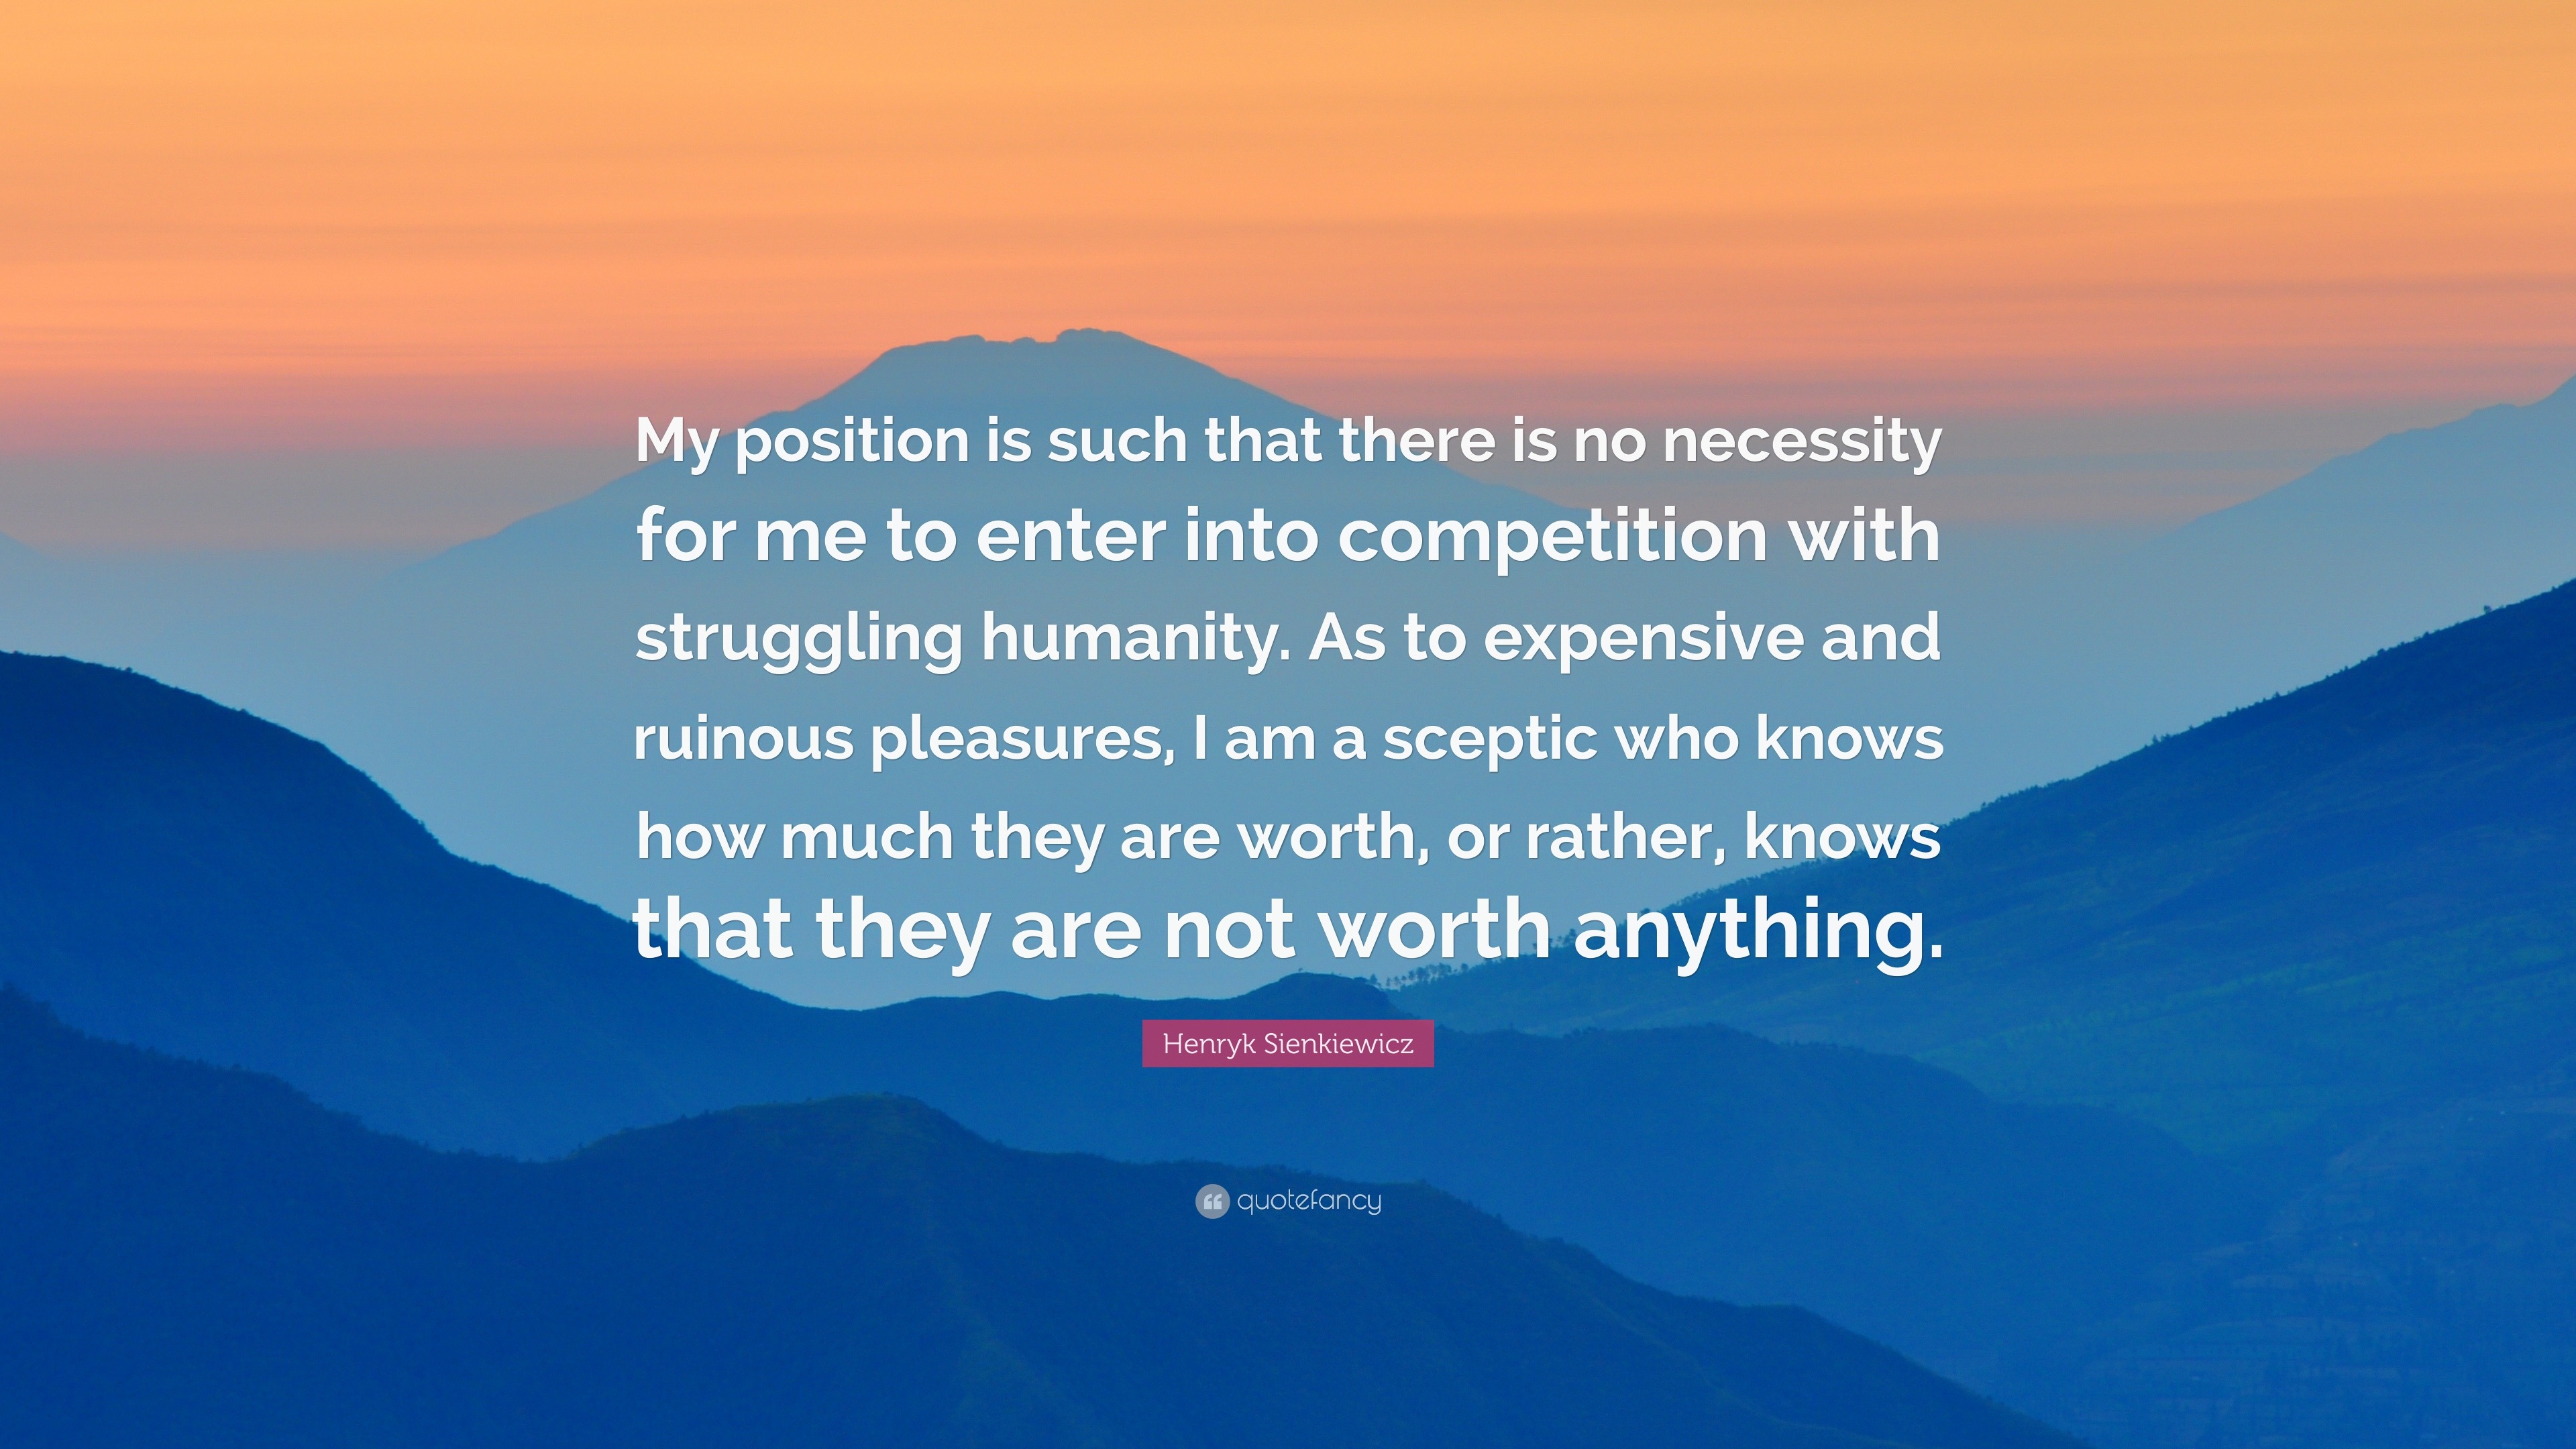 Henryk Sienkiewicz Quote: “My position is such that there is no necessity  for me to enter into competition with struggling humanity. As to  expensiv”